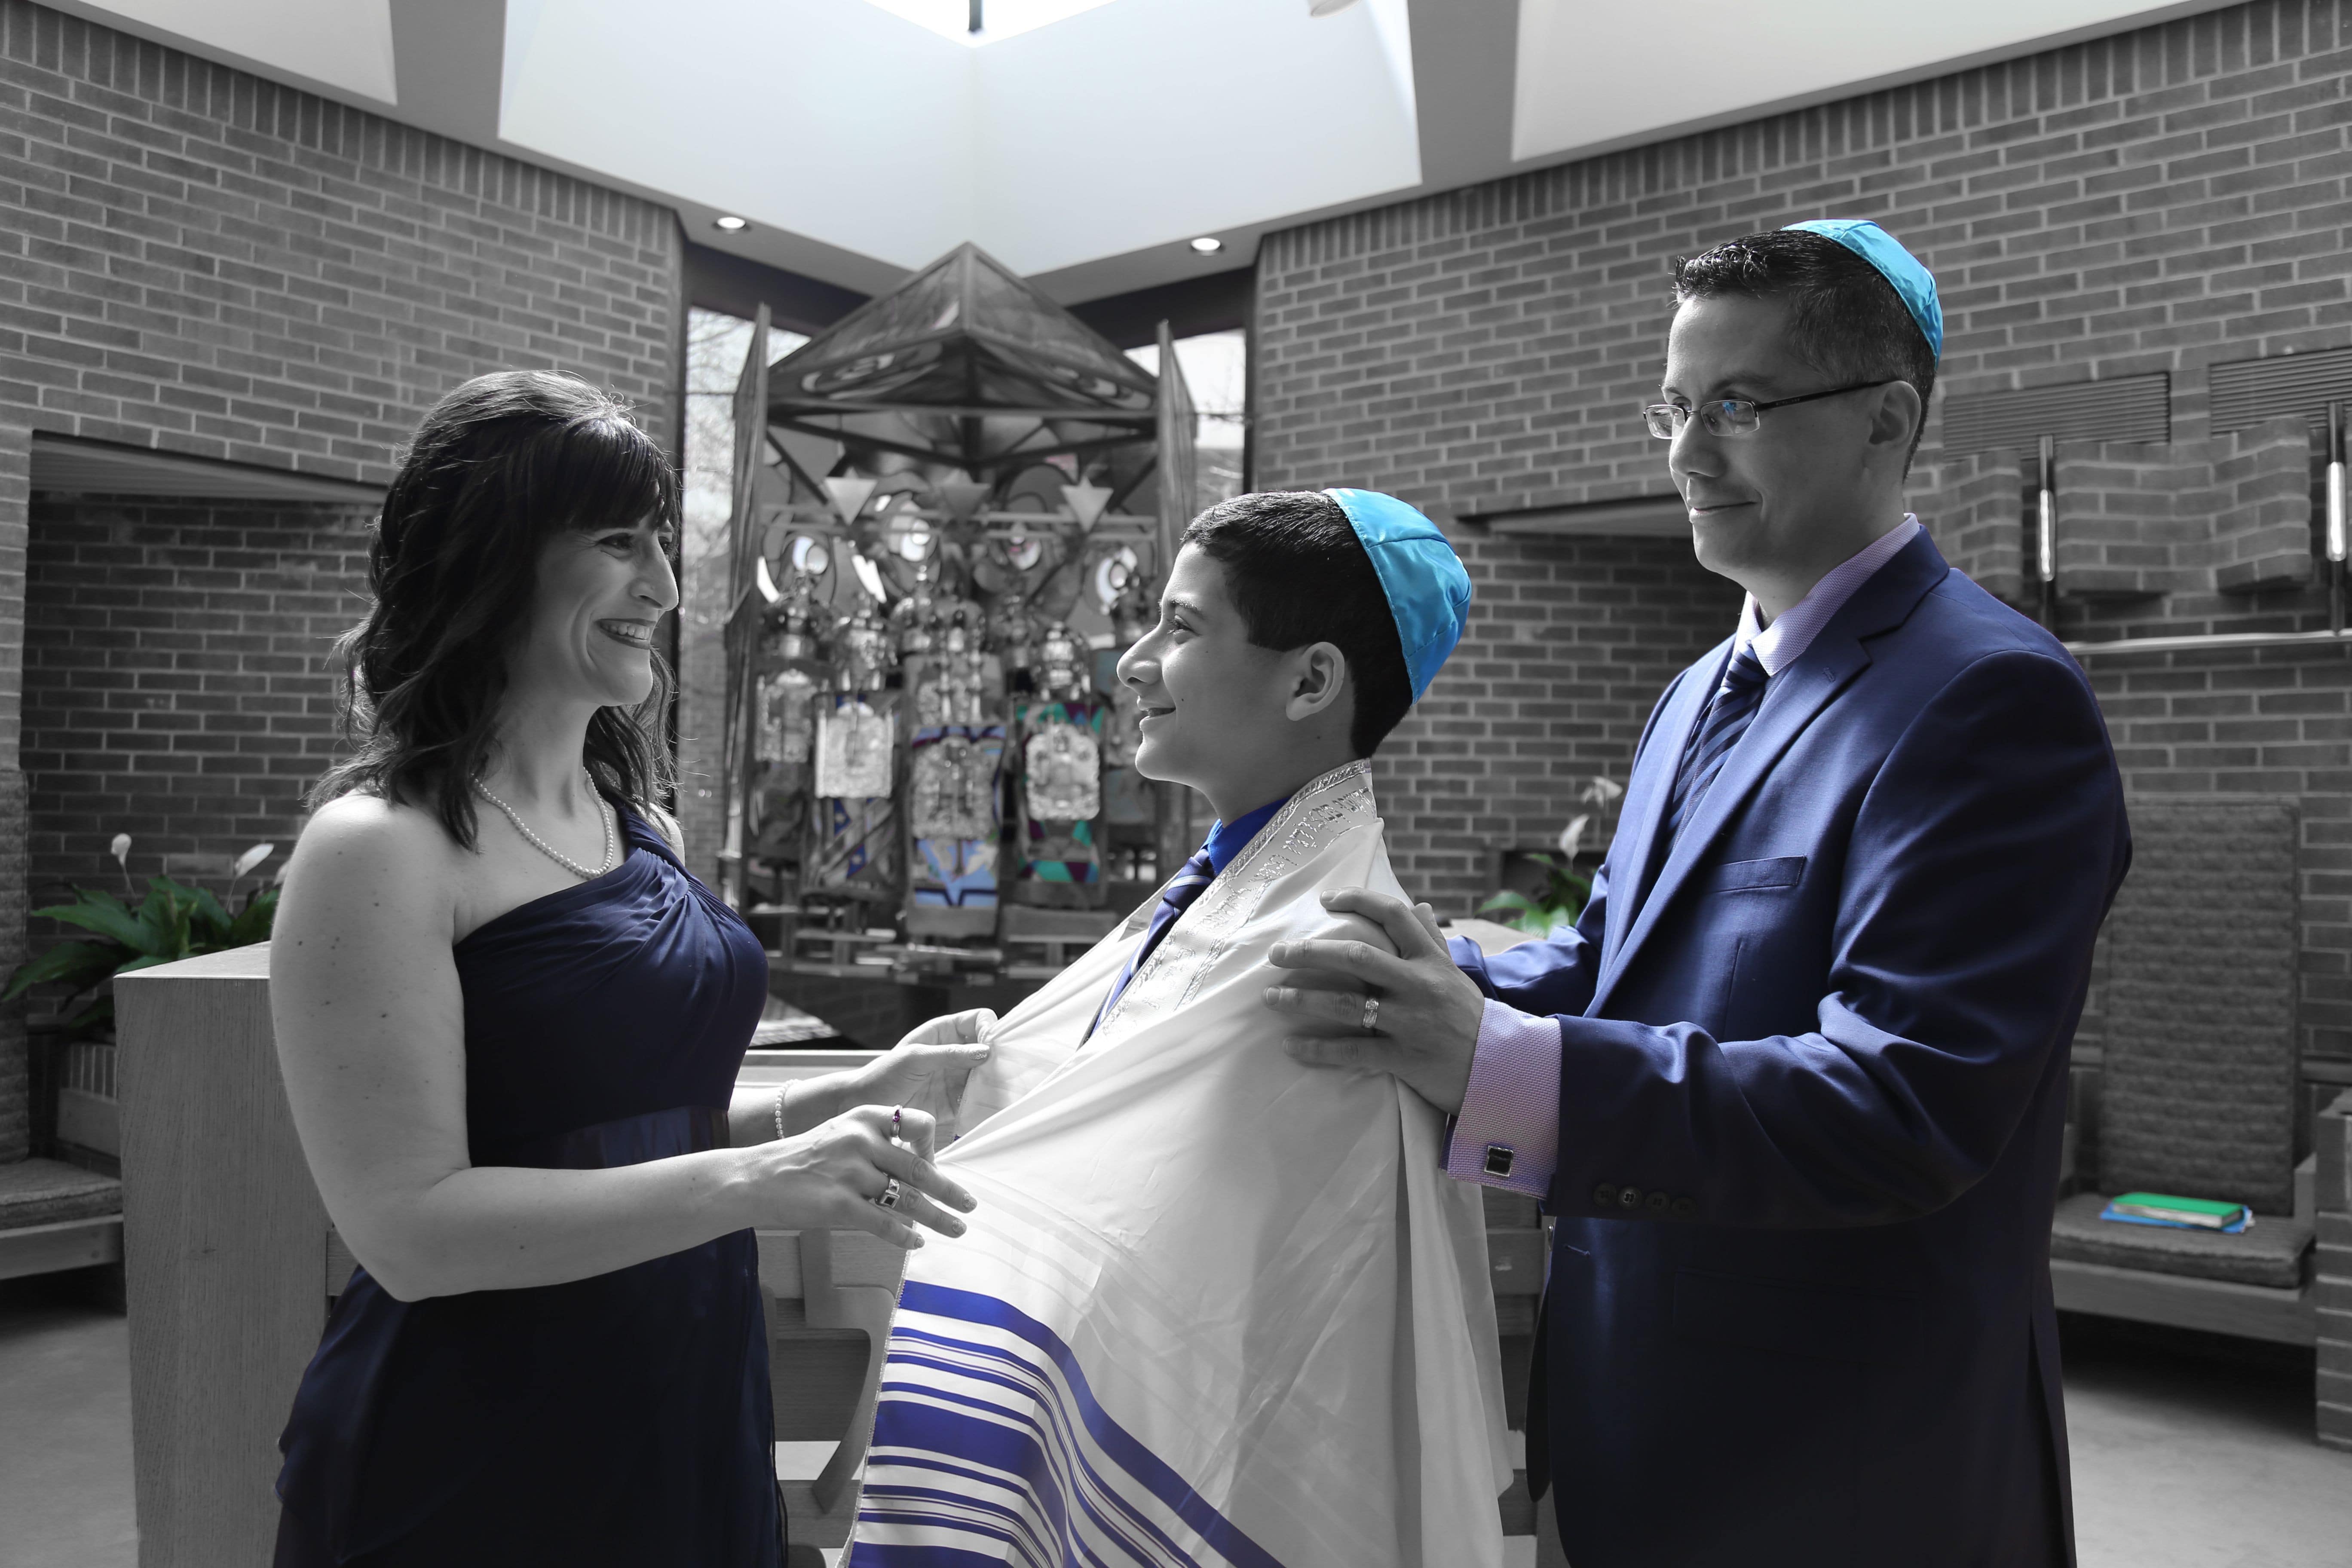 Bar Mitzvah Rehearsal Portrait Session. Mother and Father putting the ceremonial tallit on their son's shoulders. Photography by Angel at Tylerstar Productions.